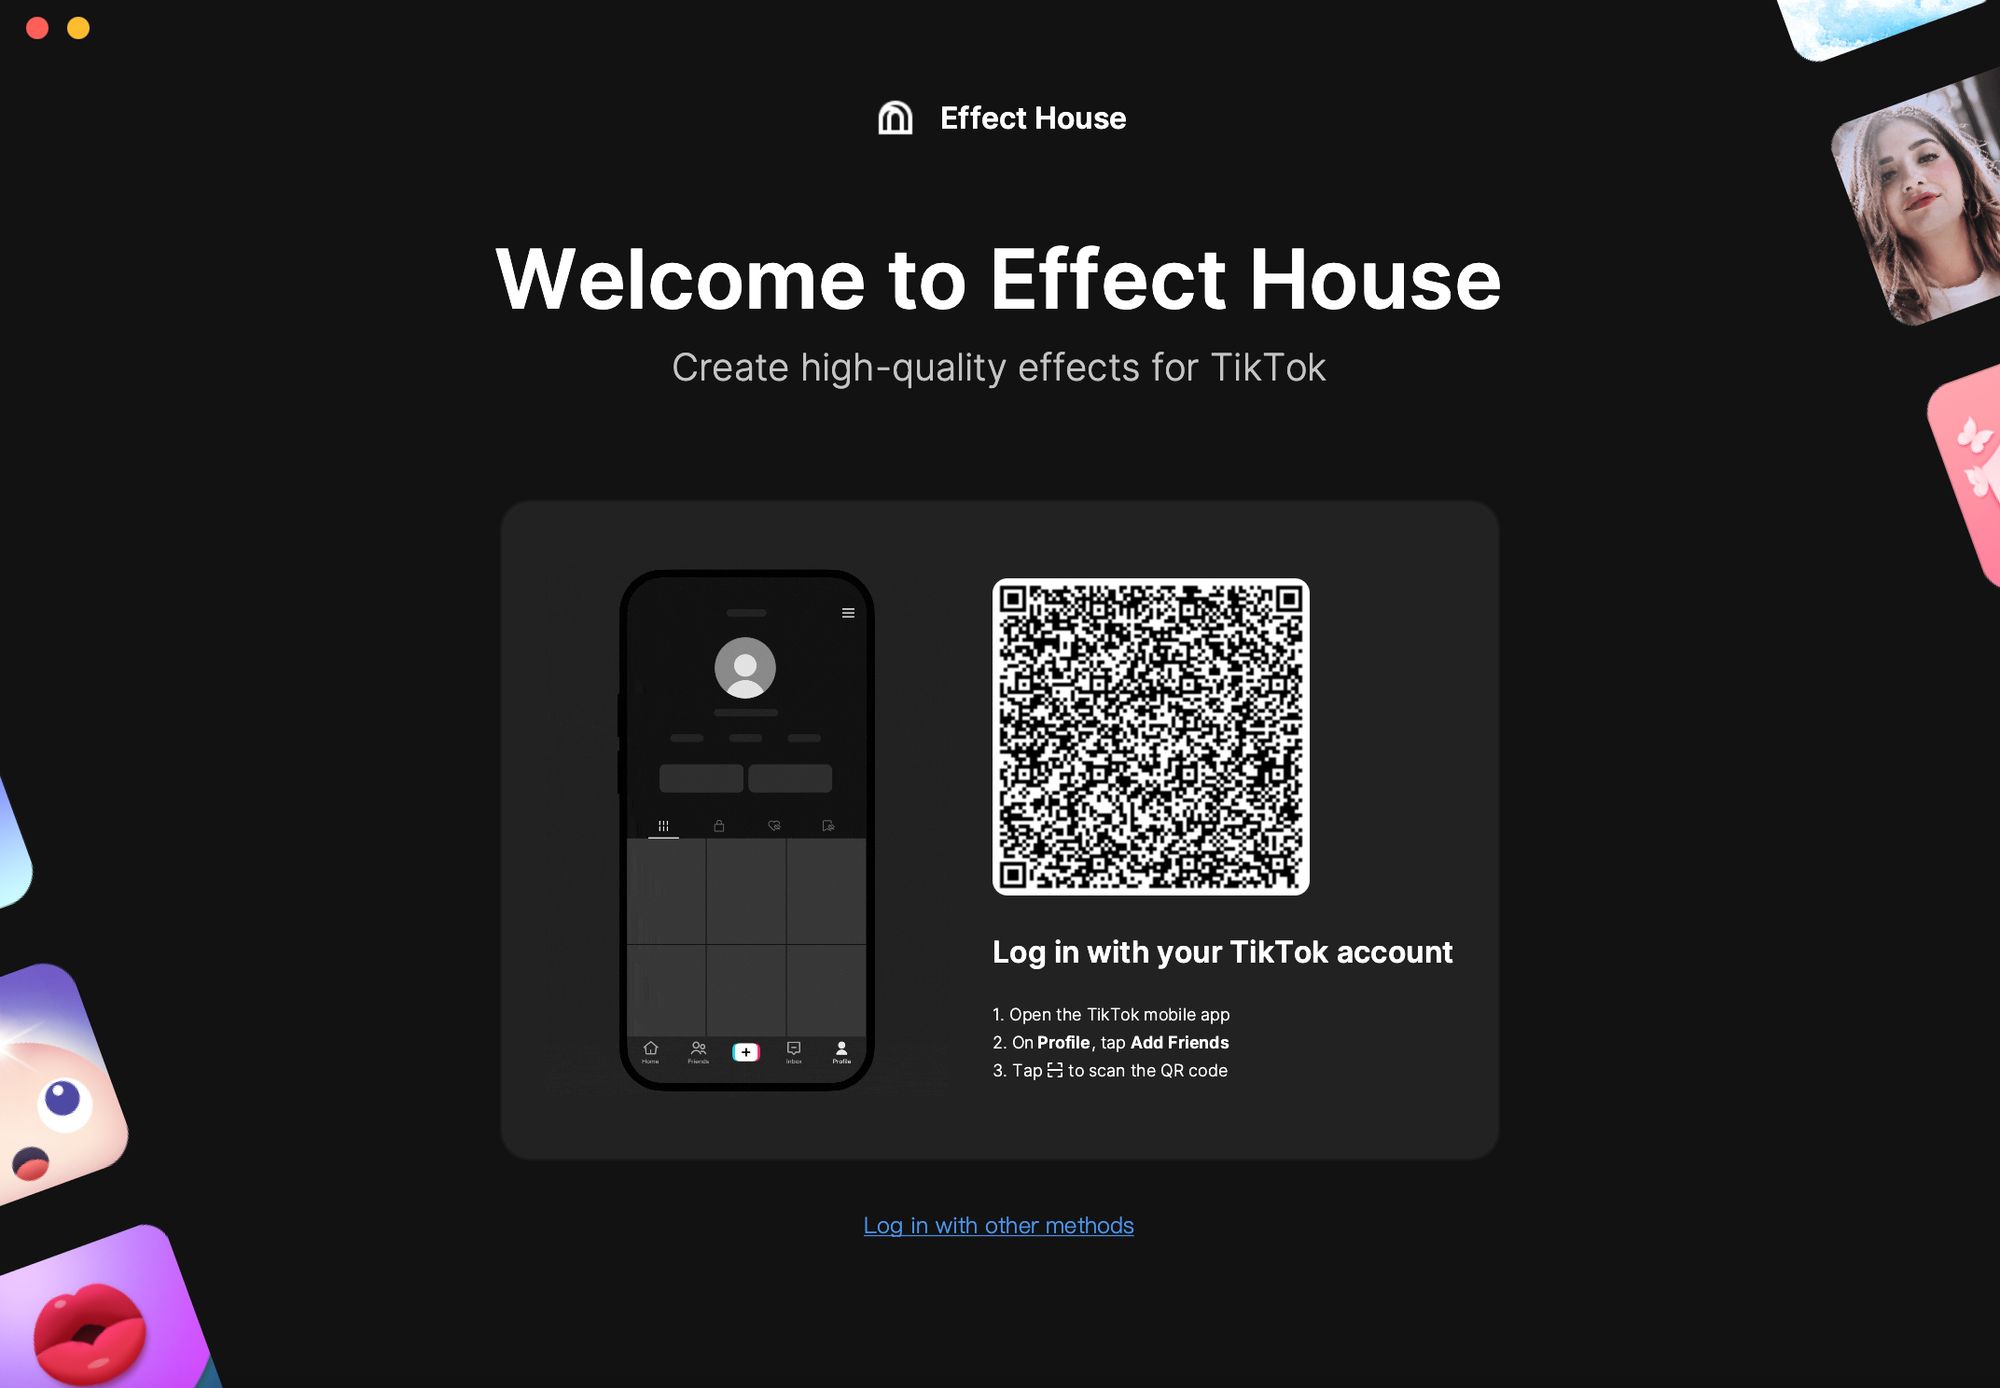 Log in to use Effect House